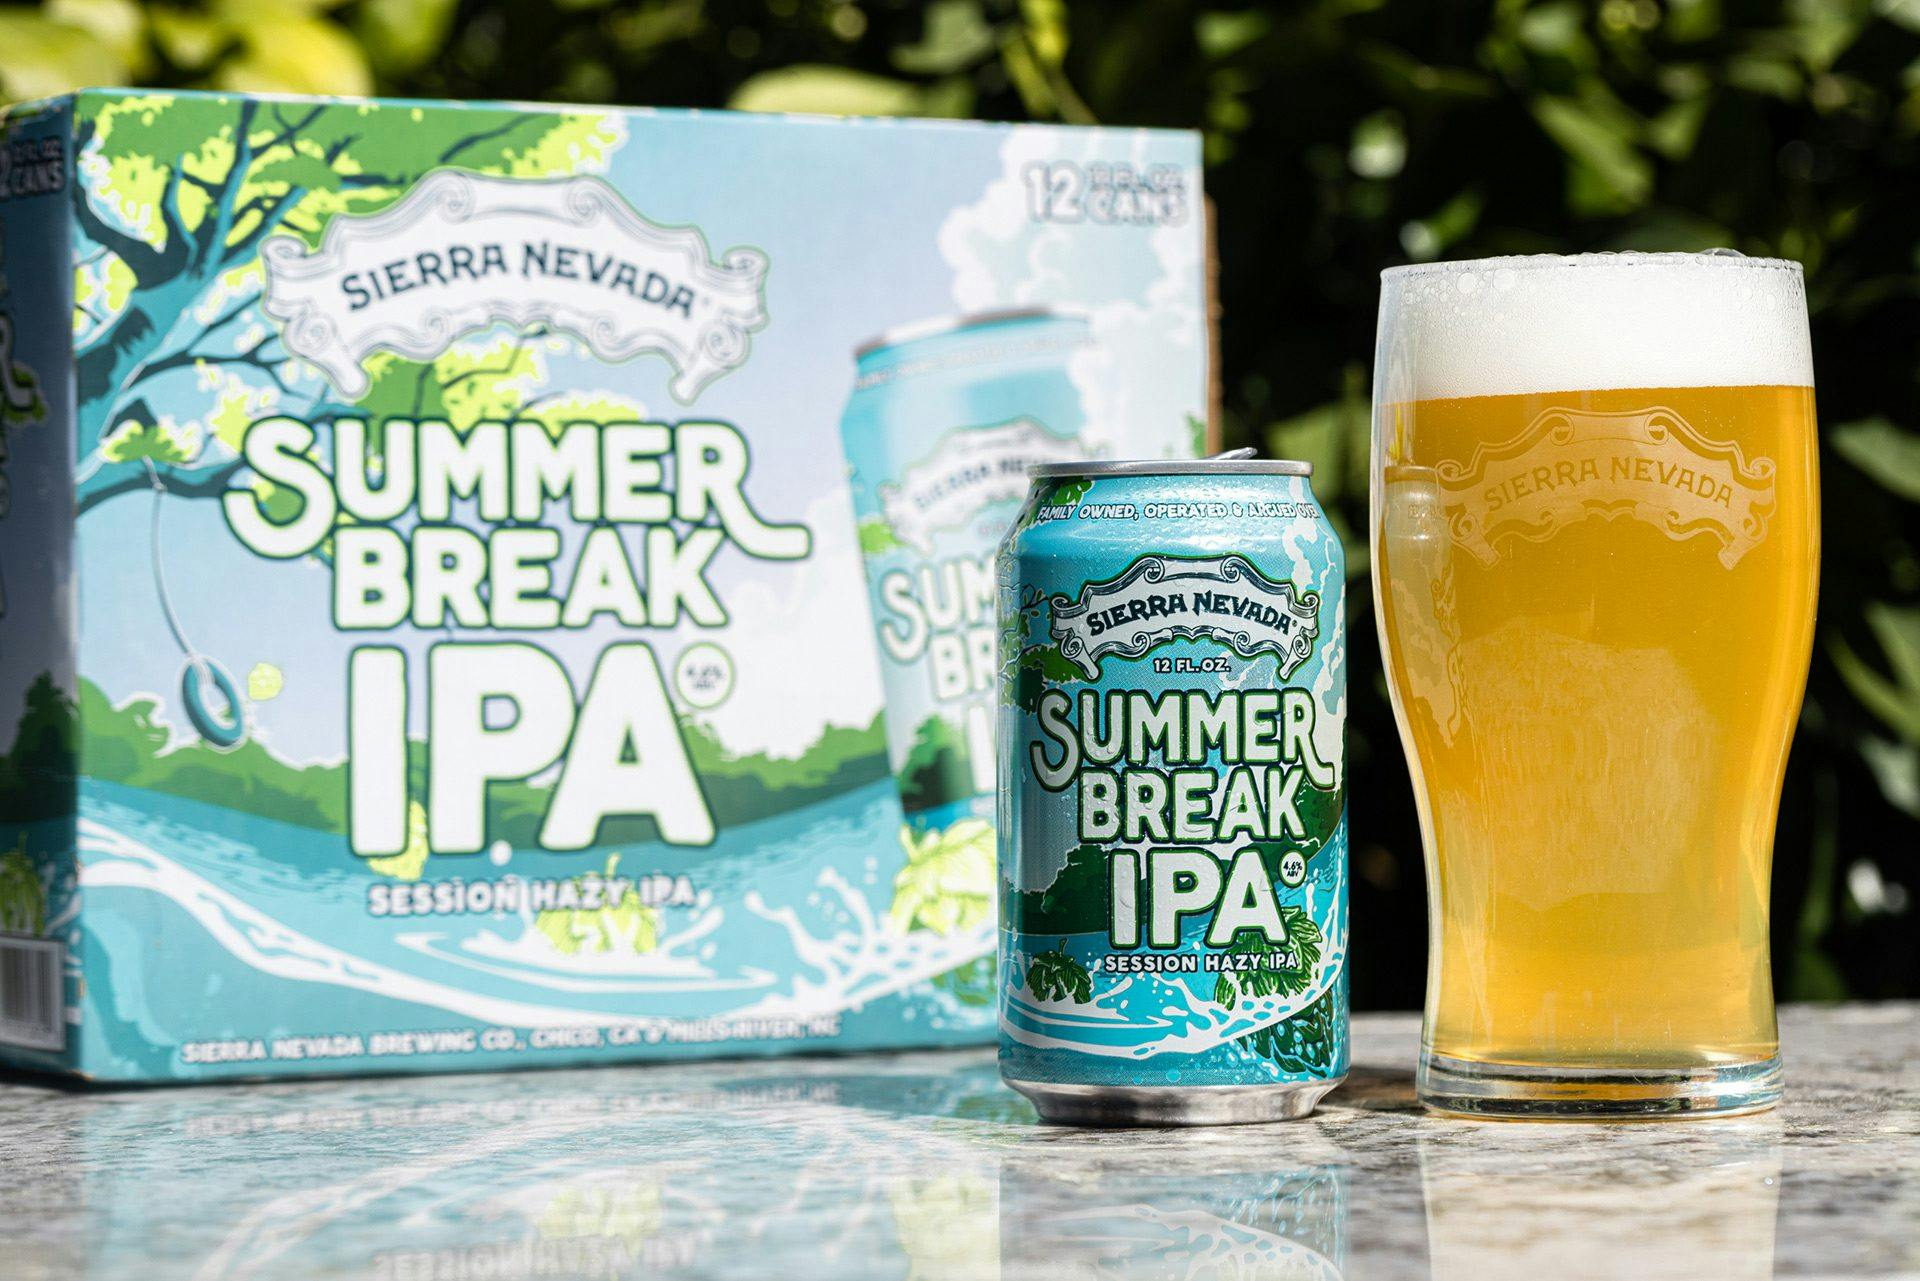 Pack of Summer Break IPA beer cans next to pint glass